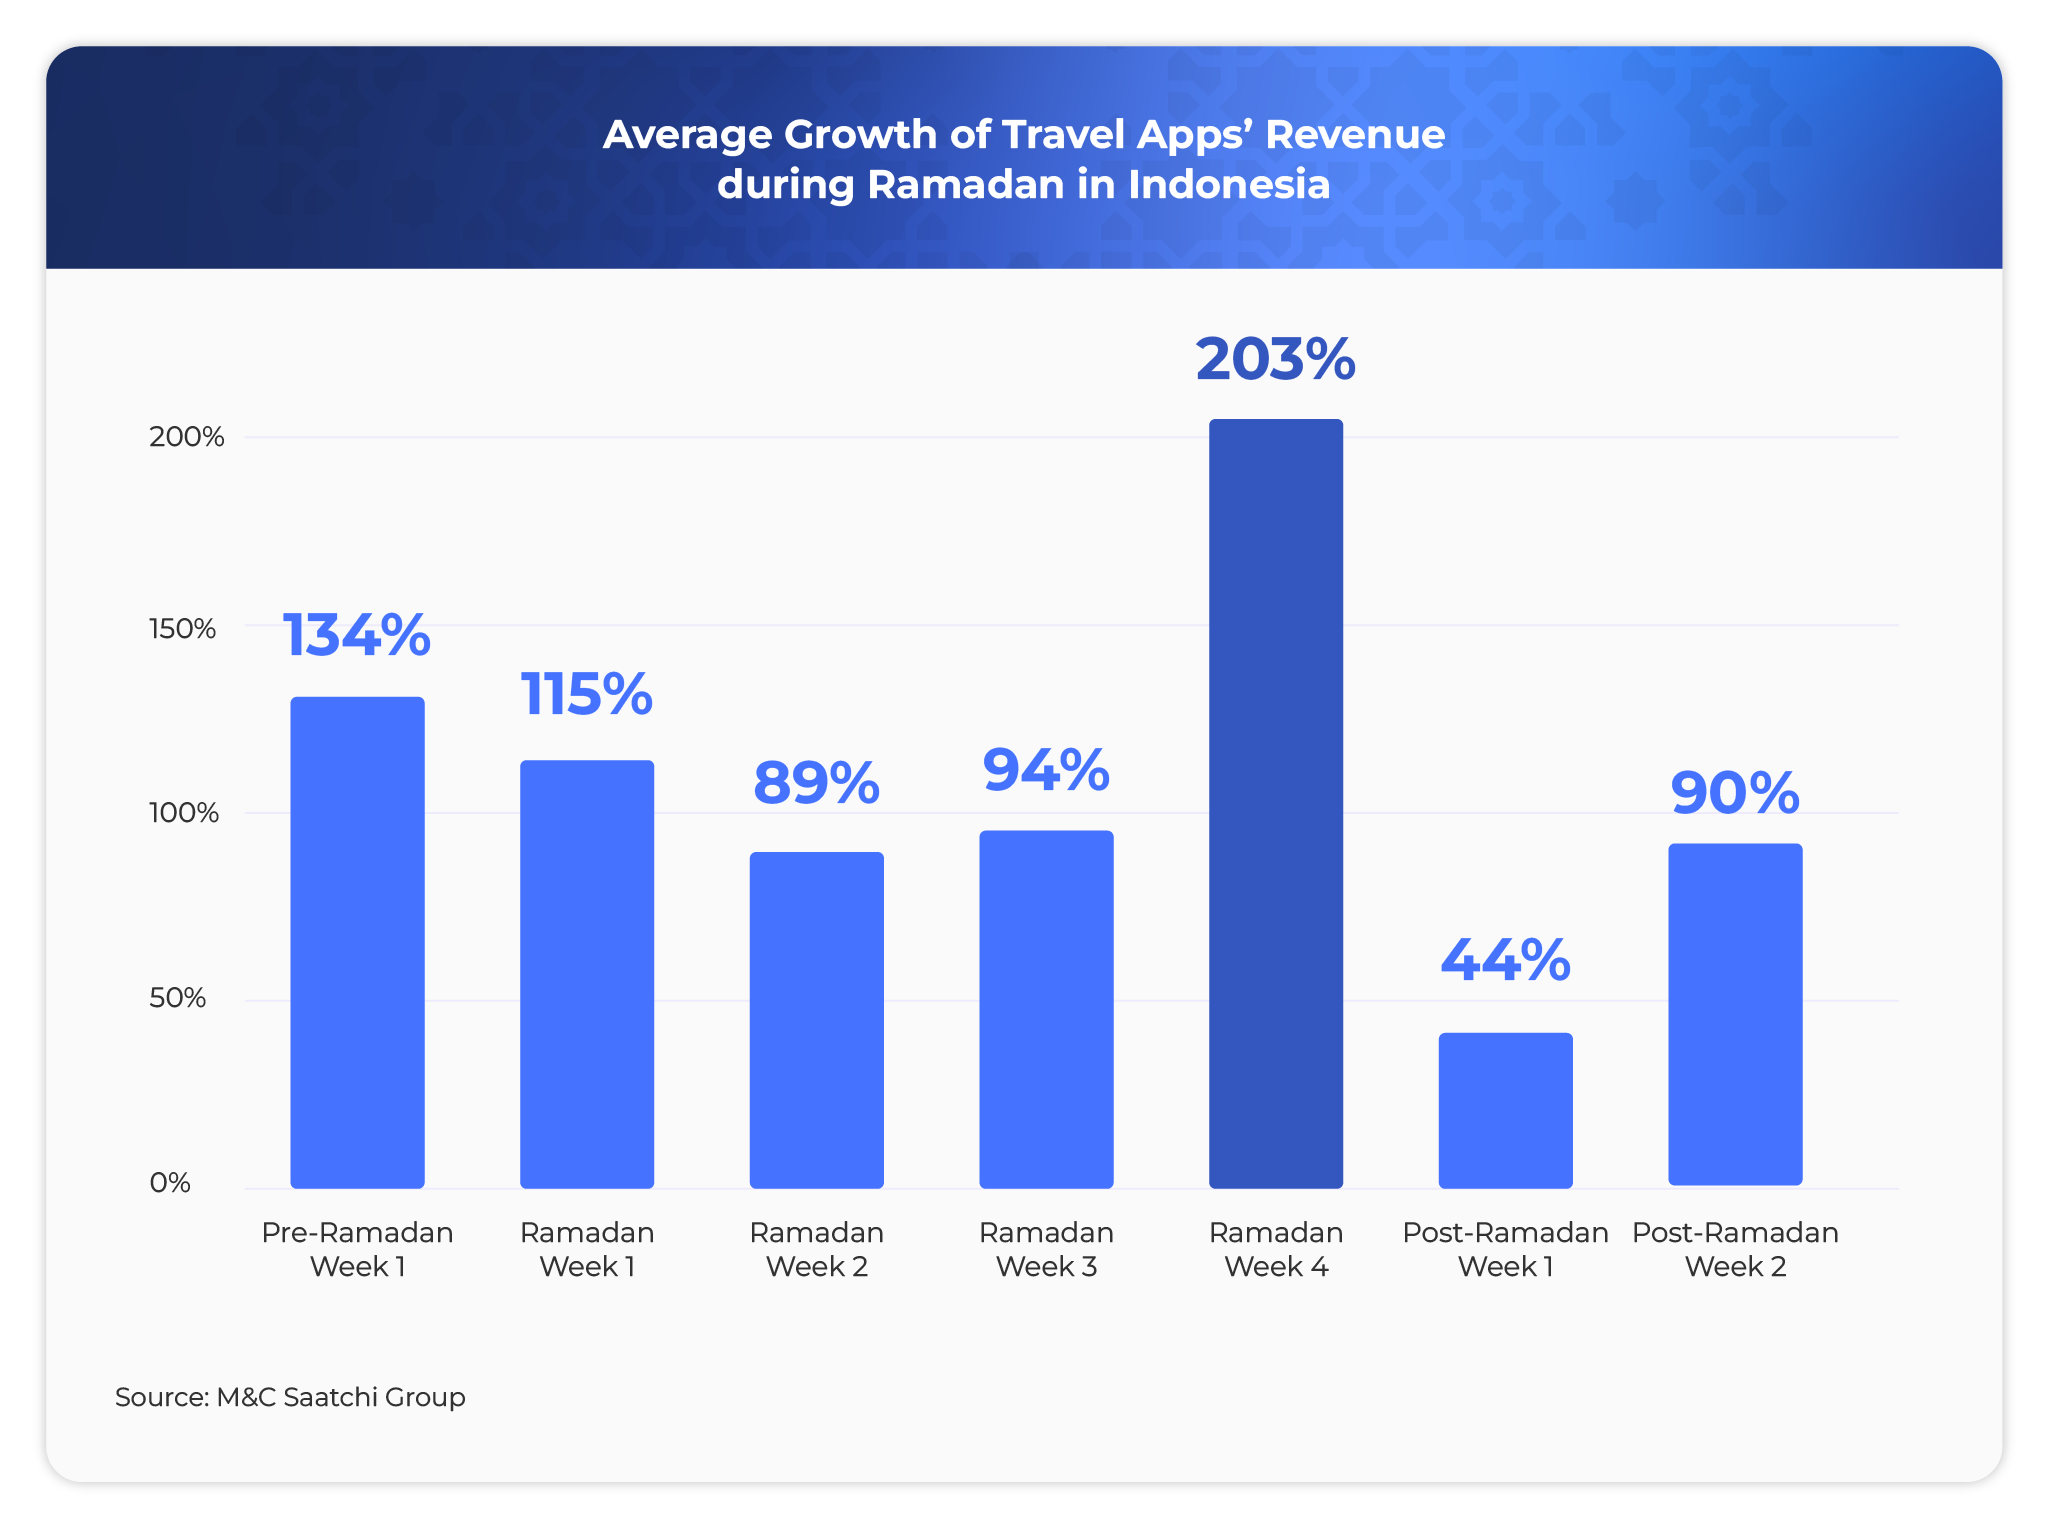 Average Growth of Travel Apps’ Revenue during Ramadan in Indonesia